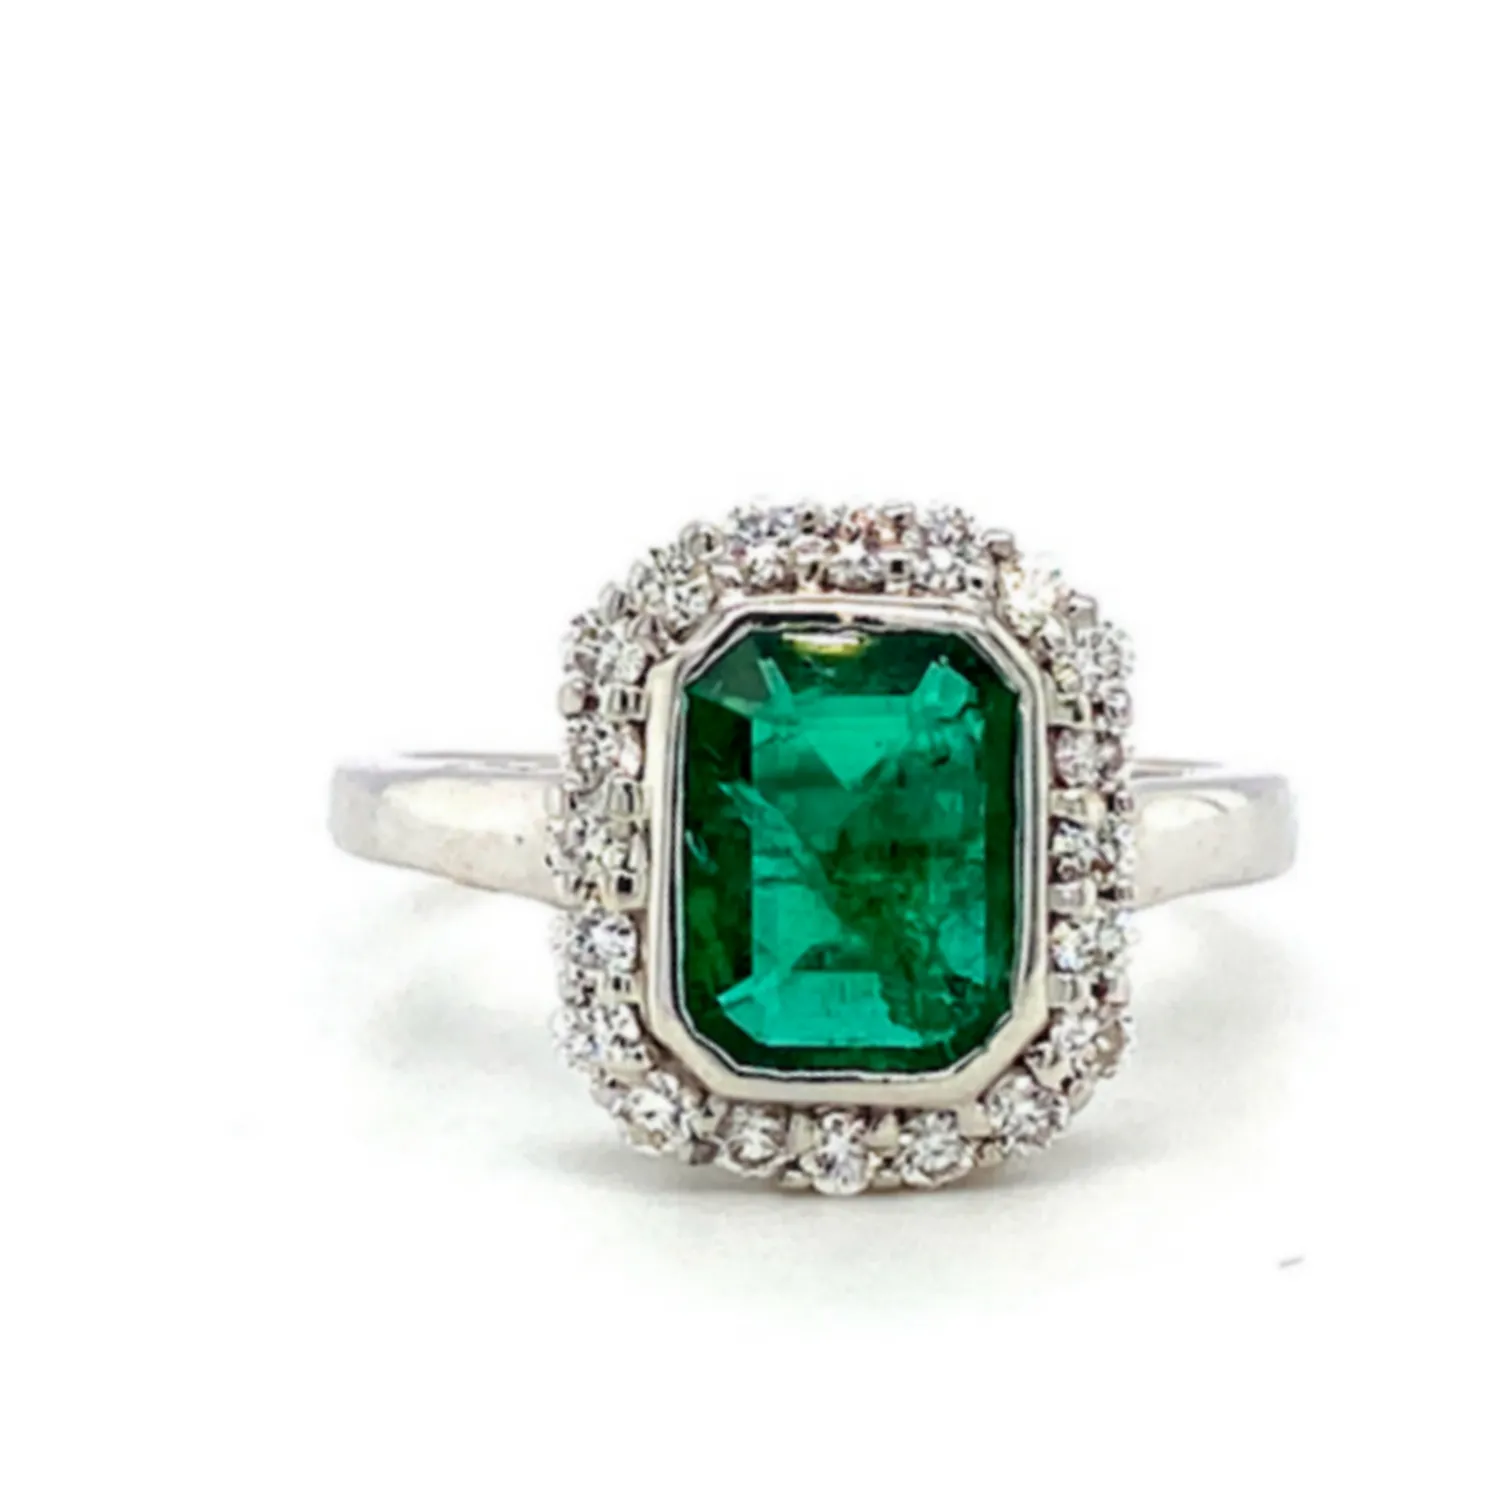 Natural Emerald Diamond Engagement Ring in 18K White Gold Precious Gemstone Wedding Jewelry Gifts Customized Rings